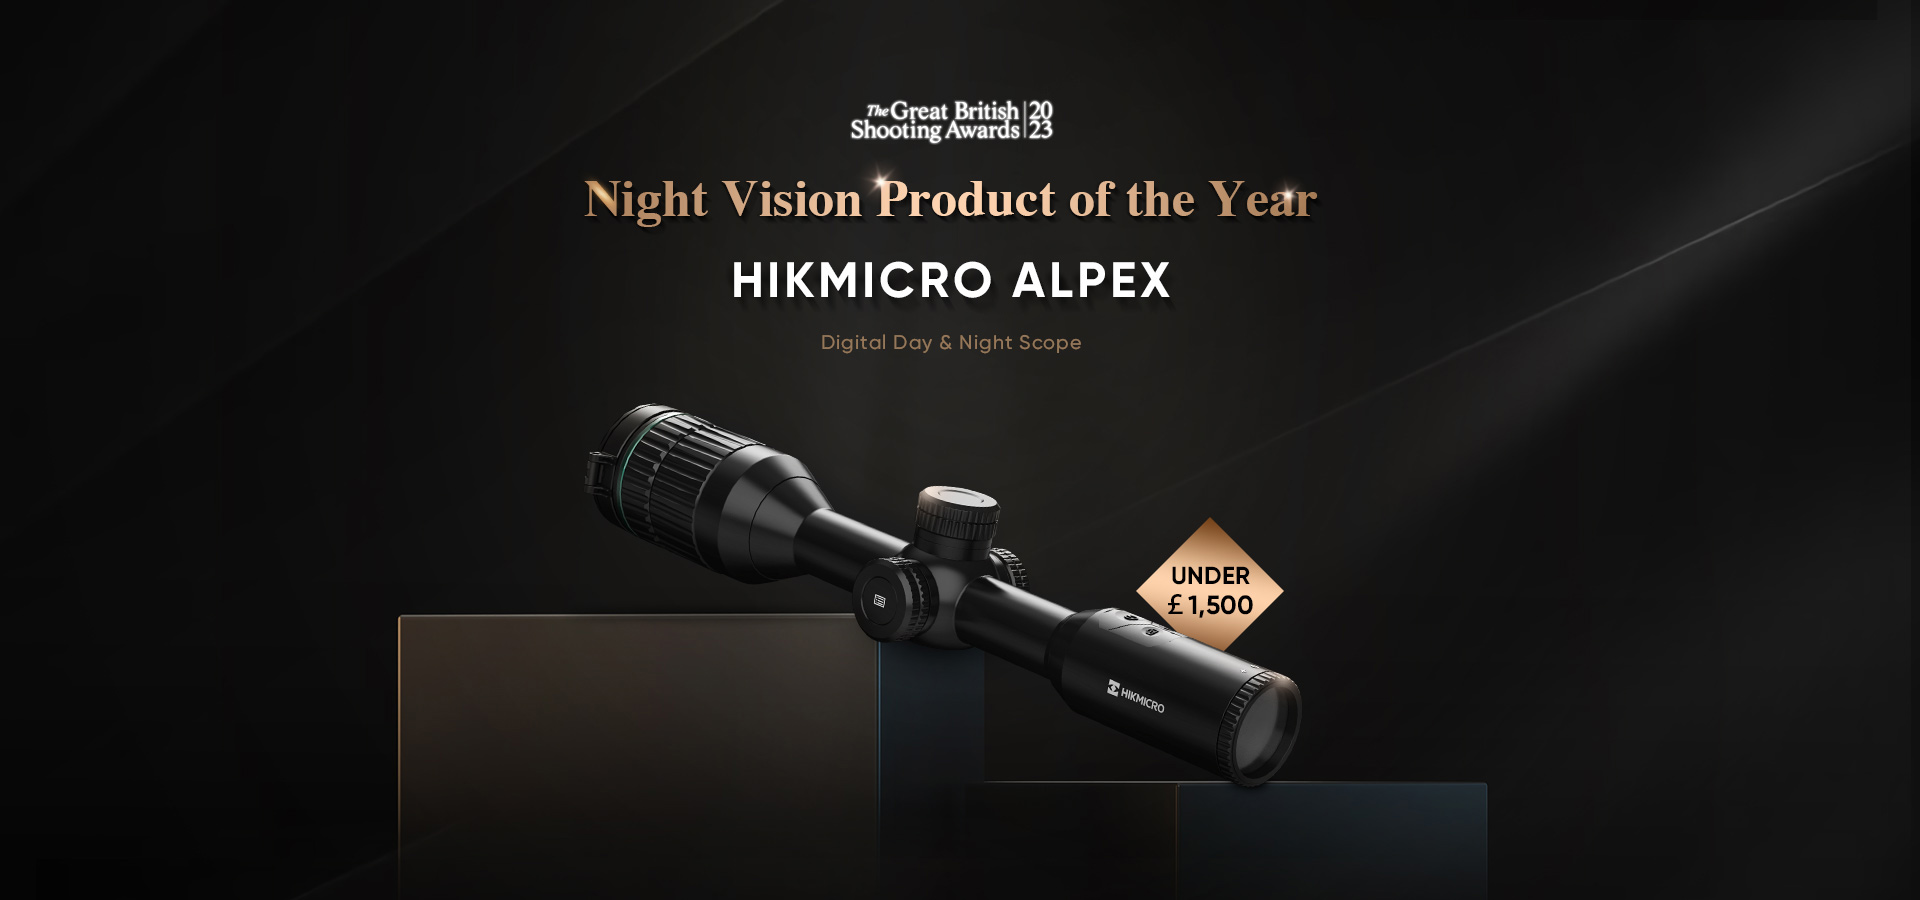 Night vision product of the year award.